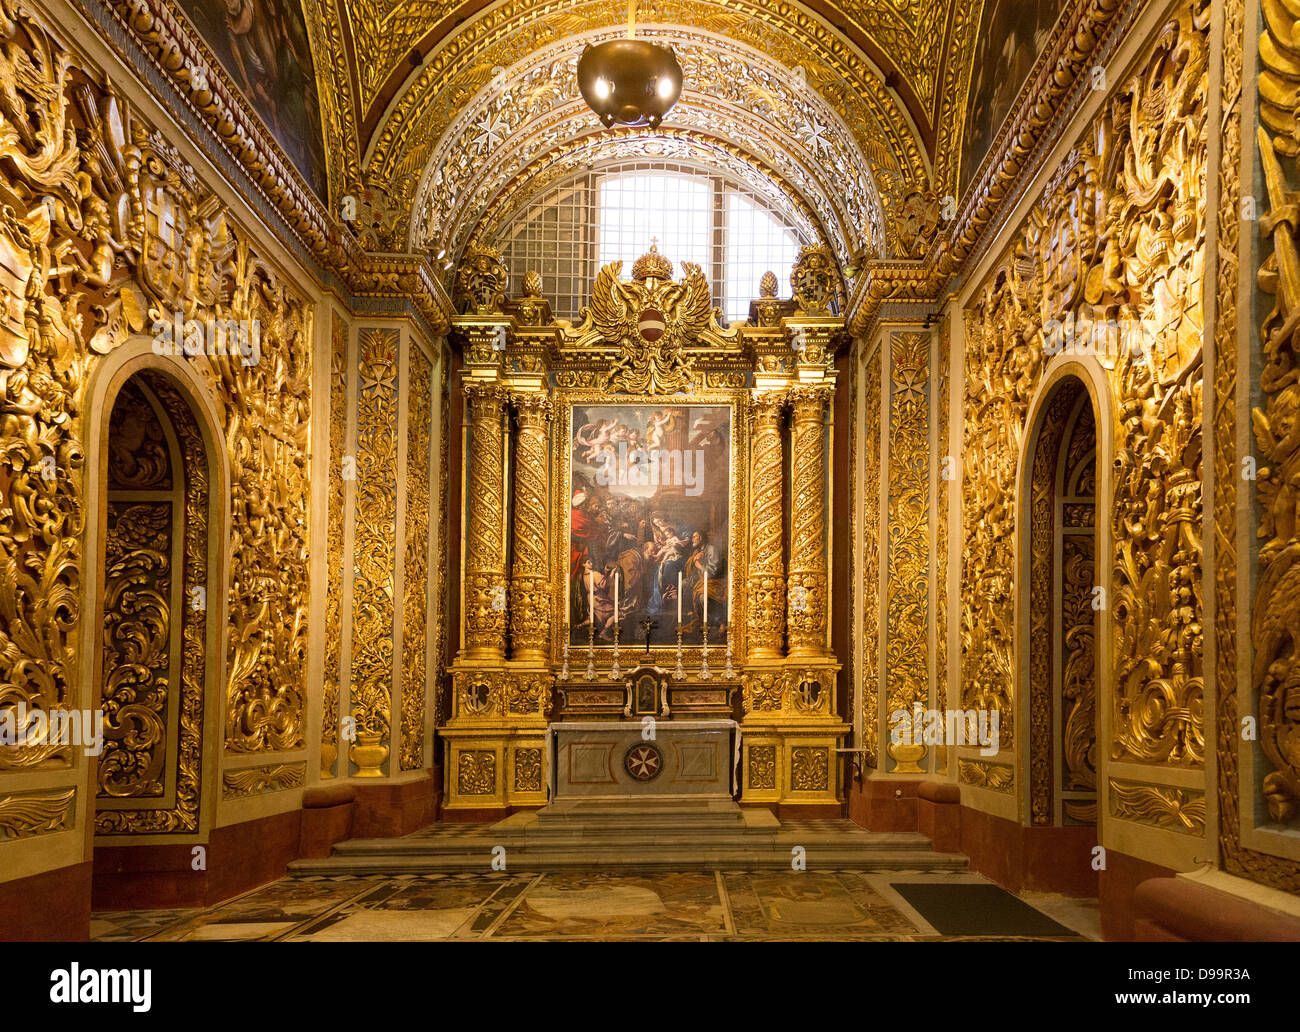 Chapel of the Langue of Germany, St John's Co-Cathedral, Valletta. Malta Stock Photo